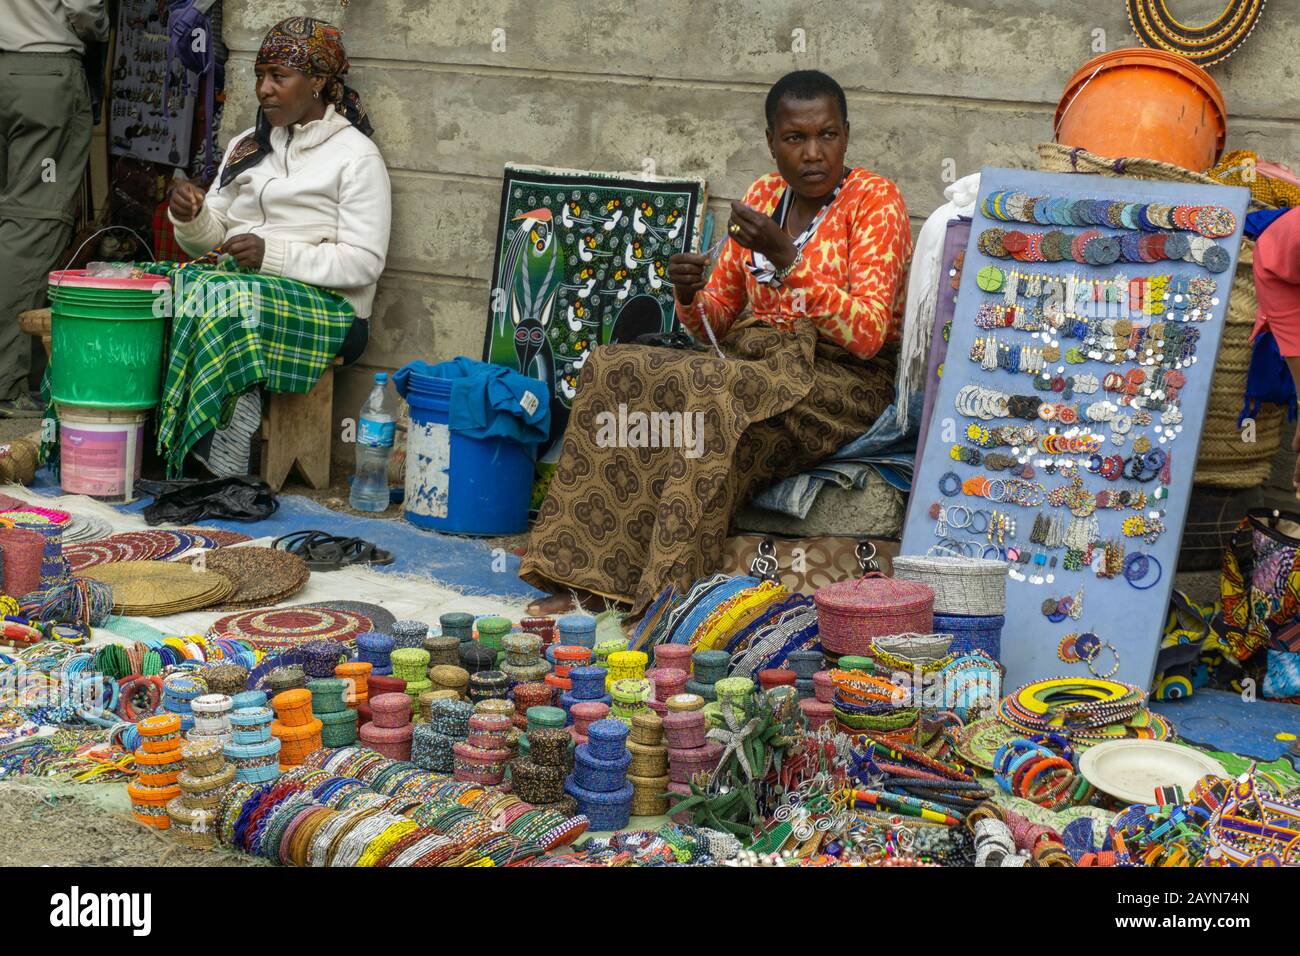 ARUSHA, TANZANIA - AUGUST 16, 2017: people at the central market of Arusha with masai handicrafts for sale Stock Photo